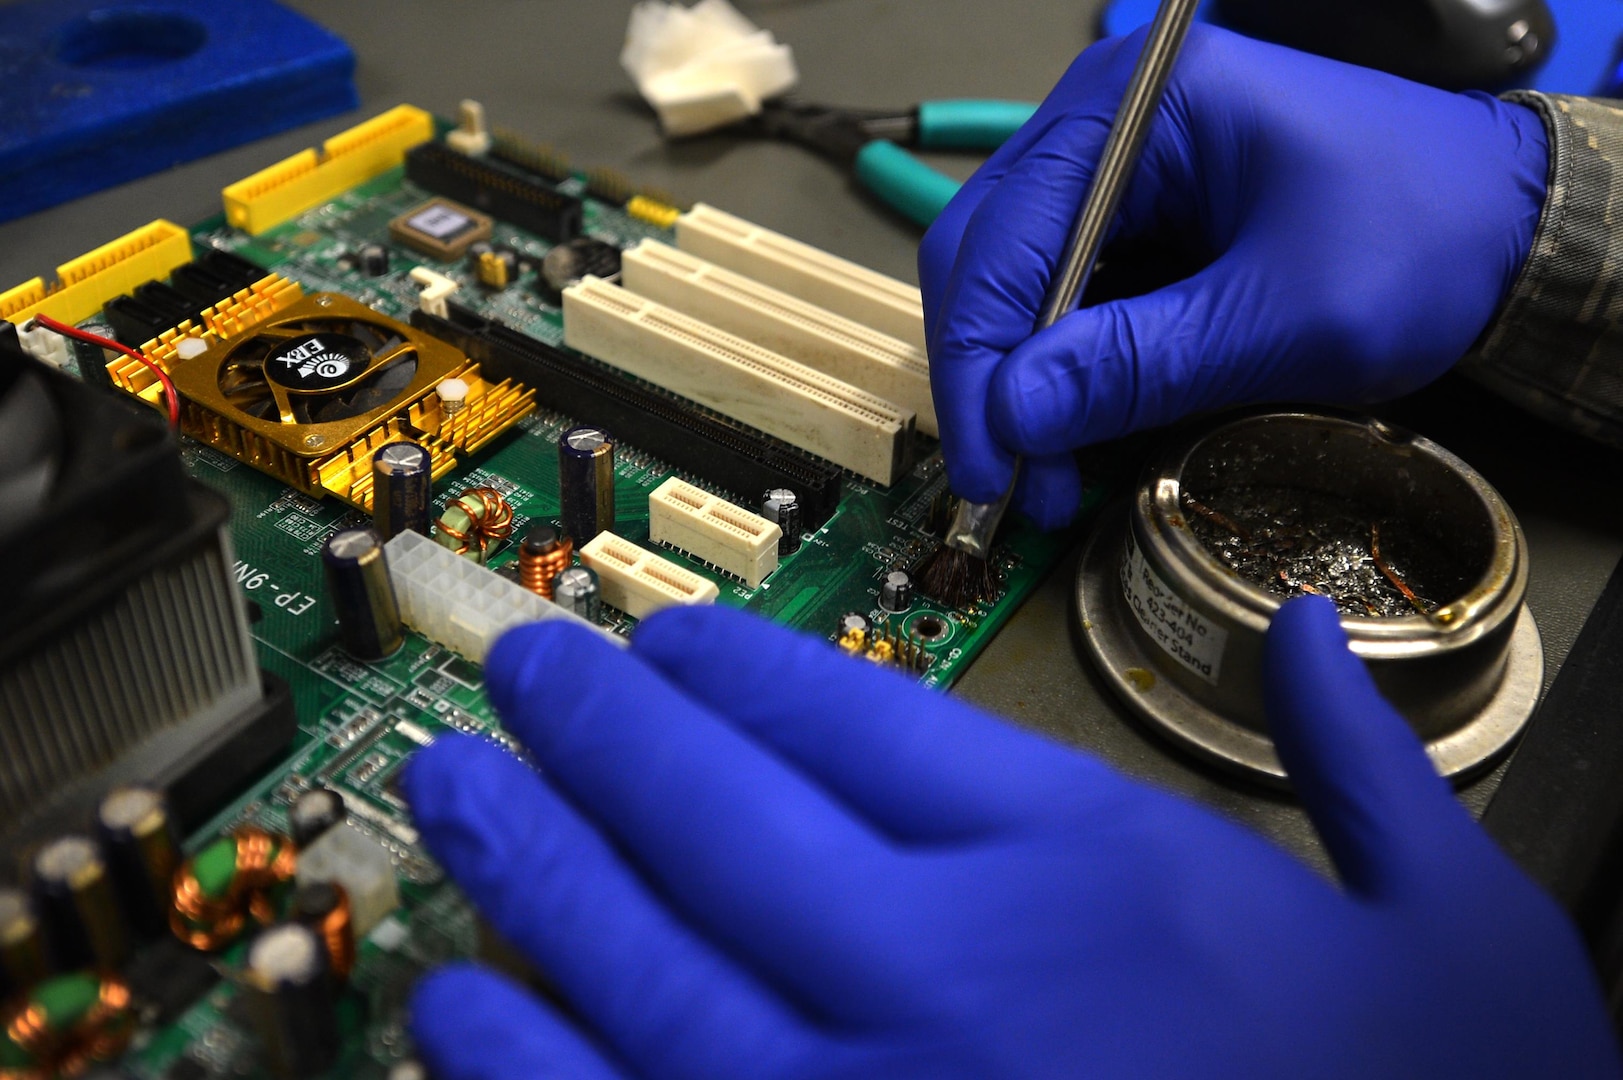 U.S. Air Force Staff Sgt. Alexander Creznic, 20th Maintenance Group Air Force Repair Enhancement Program (AFREP) technician, uses a wire brush to clean a capacitor removed from a computer’s motherboard at the AFREP work center at Shaw Air Force Base, S.C., June 12, 2017. The savings from this flight’s services have funded projects such as the 20th Component Maintenance Squadron paint booth and sun shades for Shaw’s 79 F-16CM Fighting Falcons.   (U.S. Air Force photo by Airman 1st Class Christopher Maldonado)